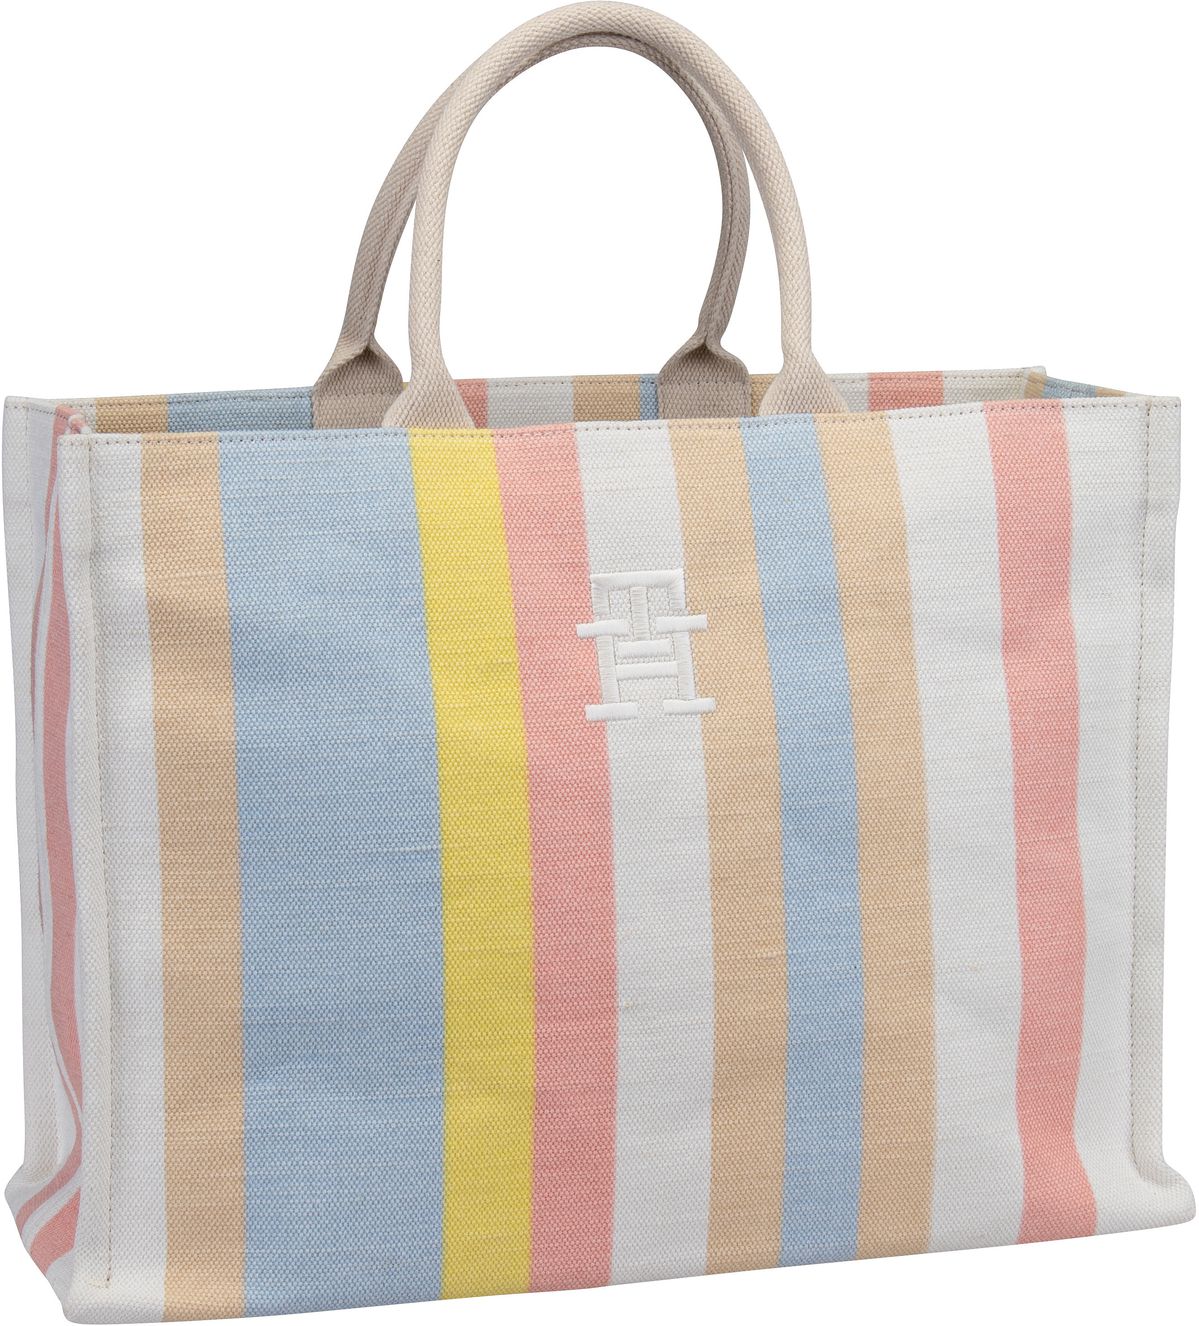 Tommy Hilfiger  TH Beach Tote Stripes SP24 - Tote Bag - Mehrfarbig (Striped Canvas)